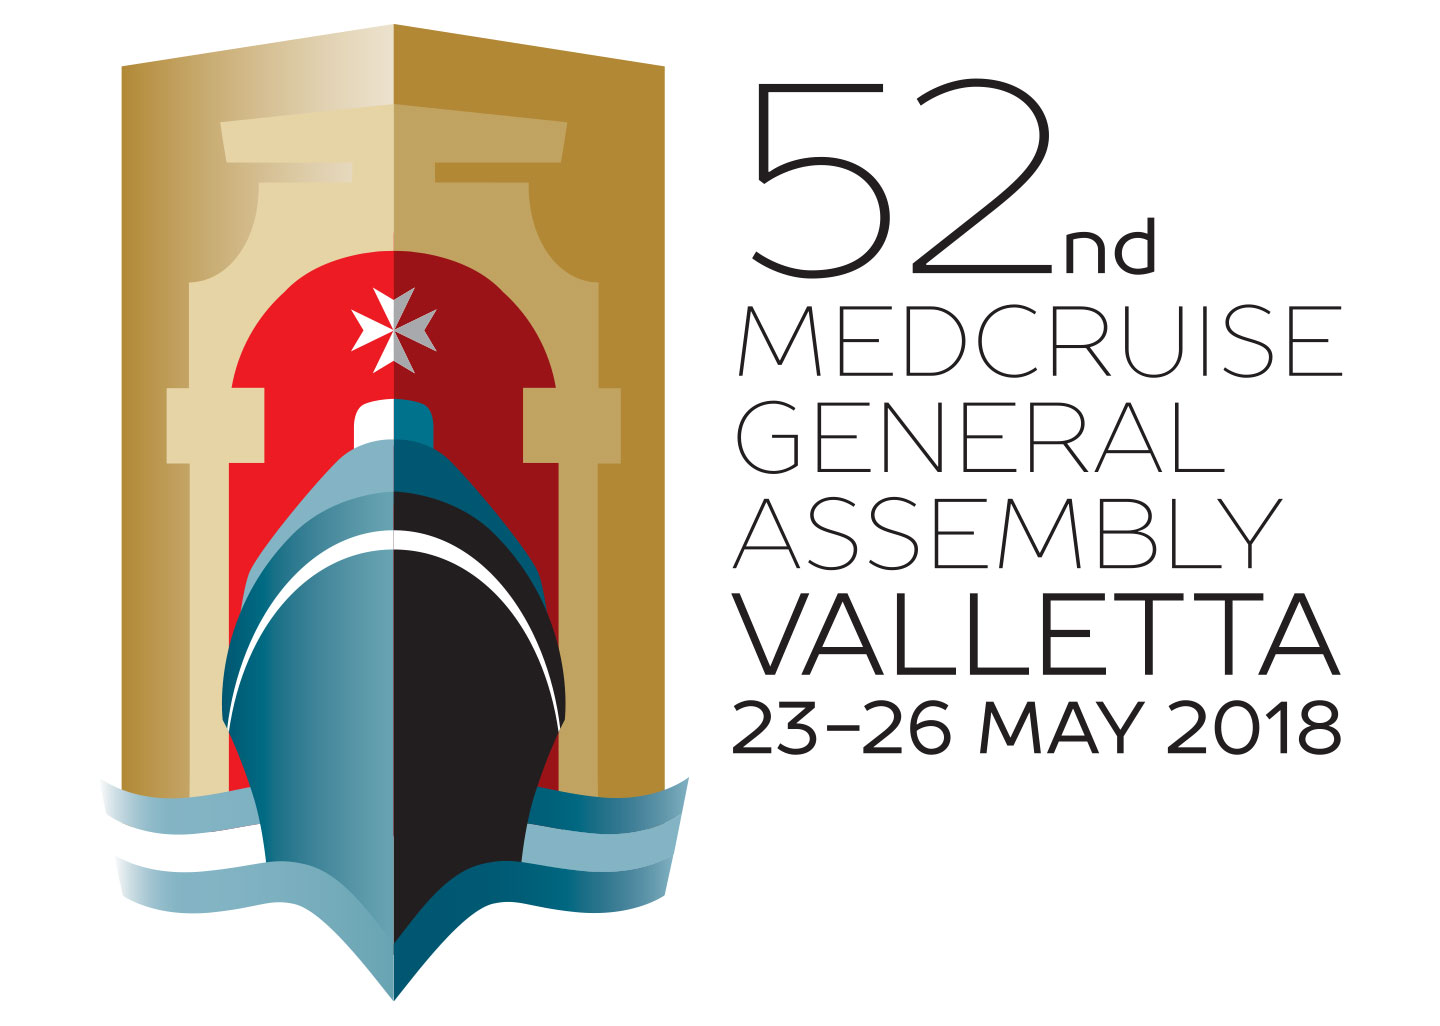 The 52nd Medcruise General Assembly in Valletta